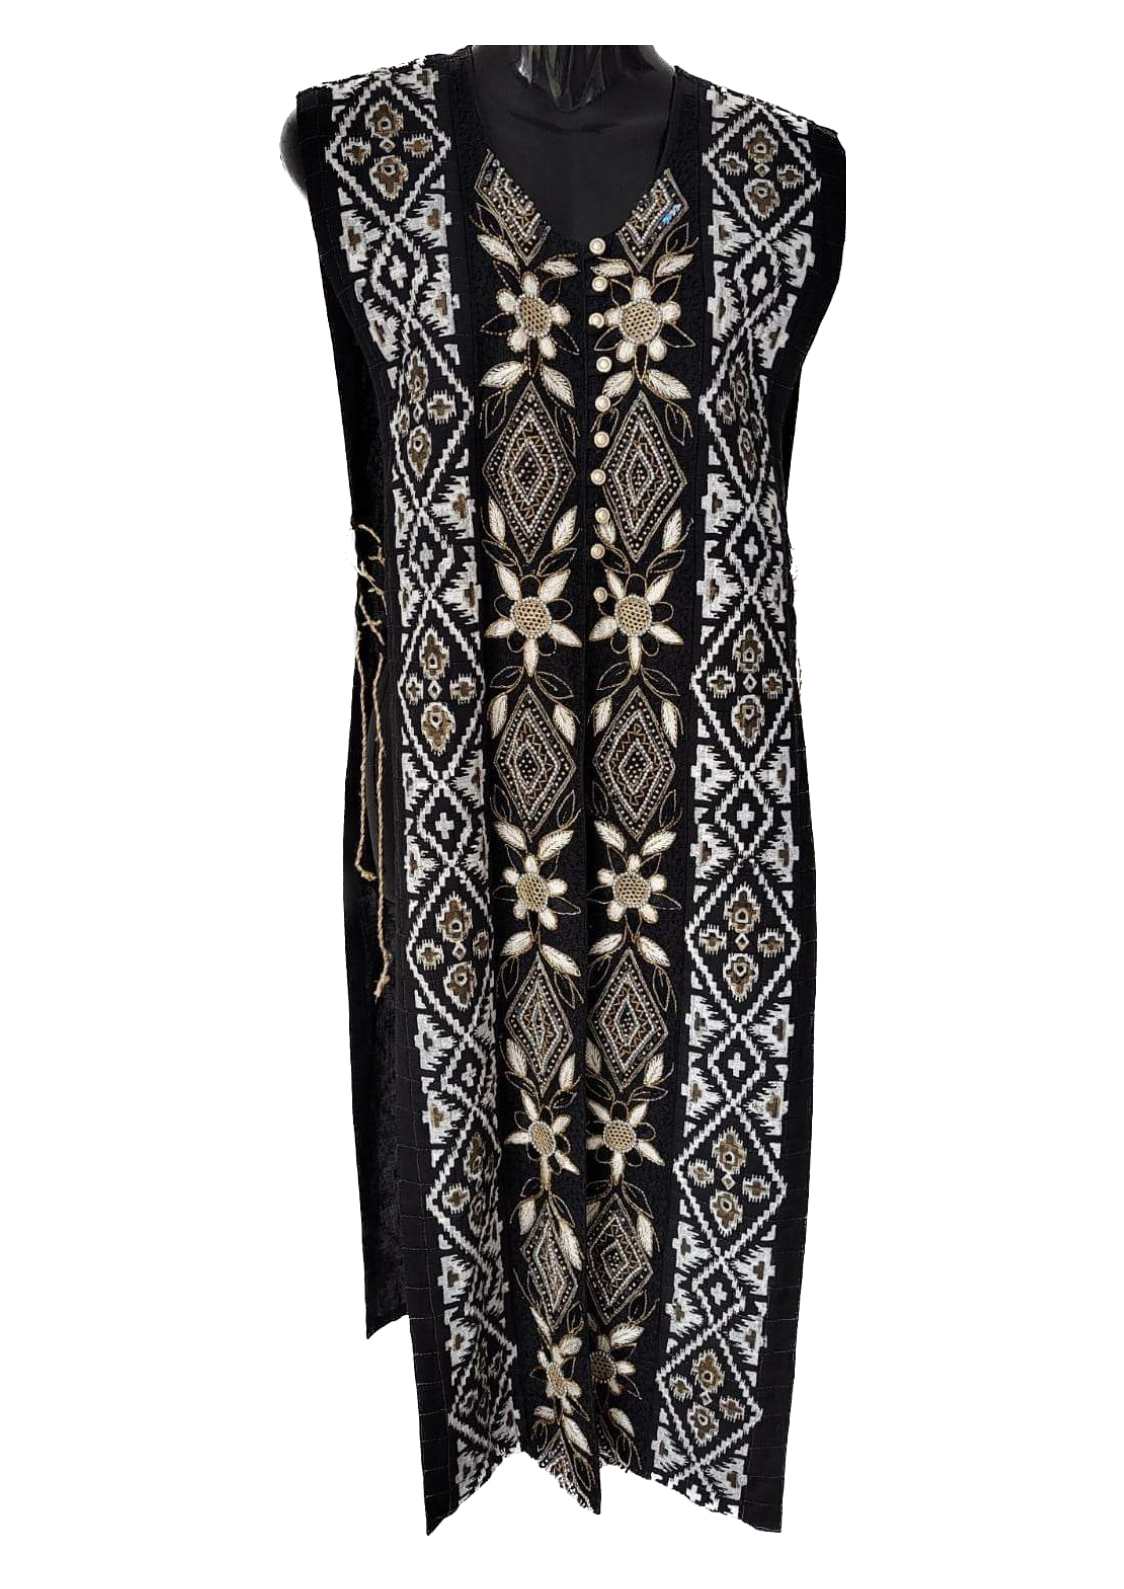 Gold and Black Tunic with Beading and Sequins open size - The Sassi ...